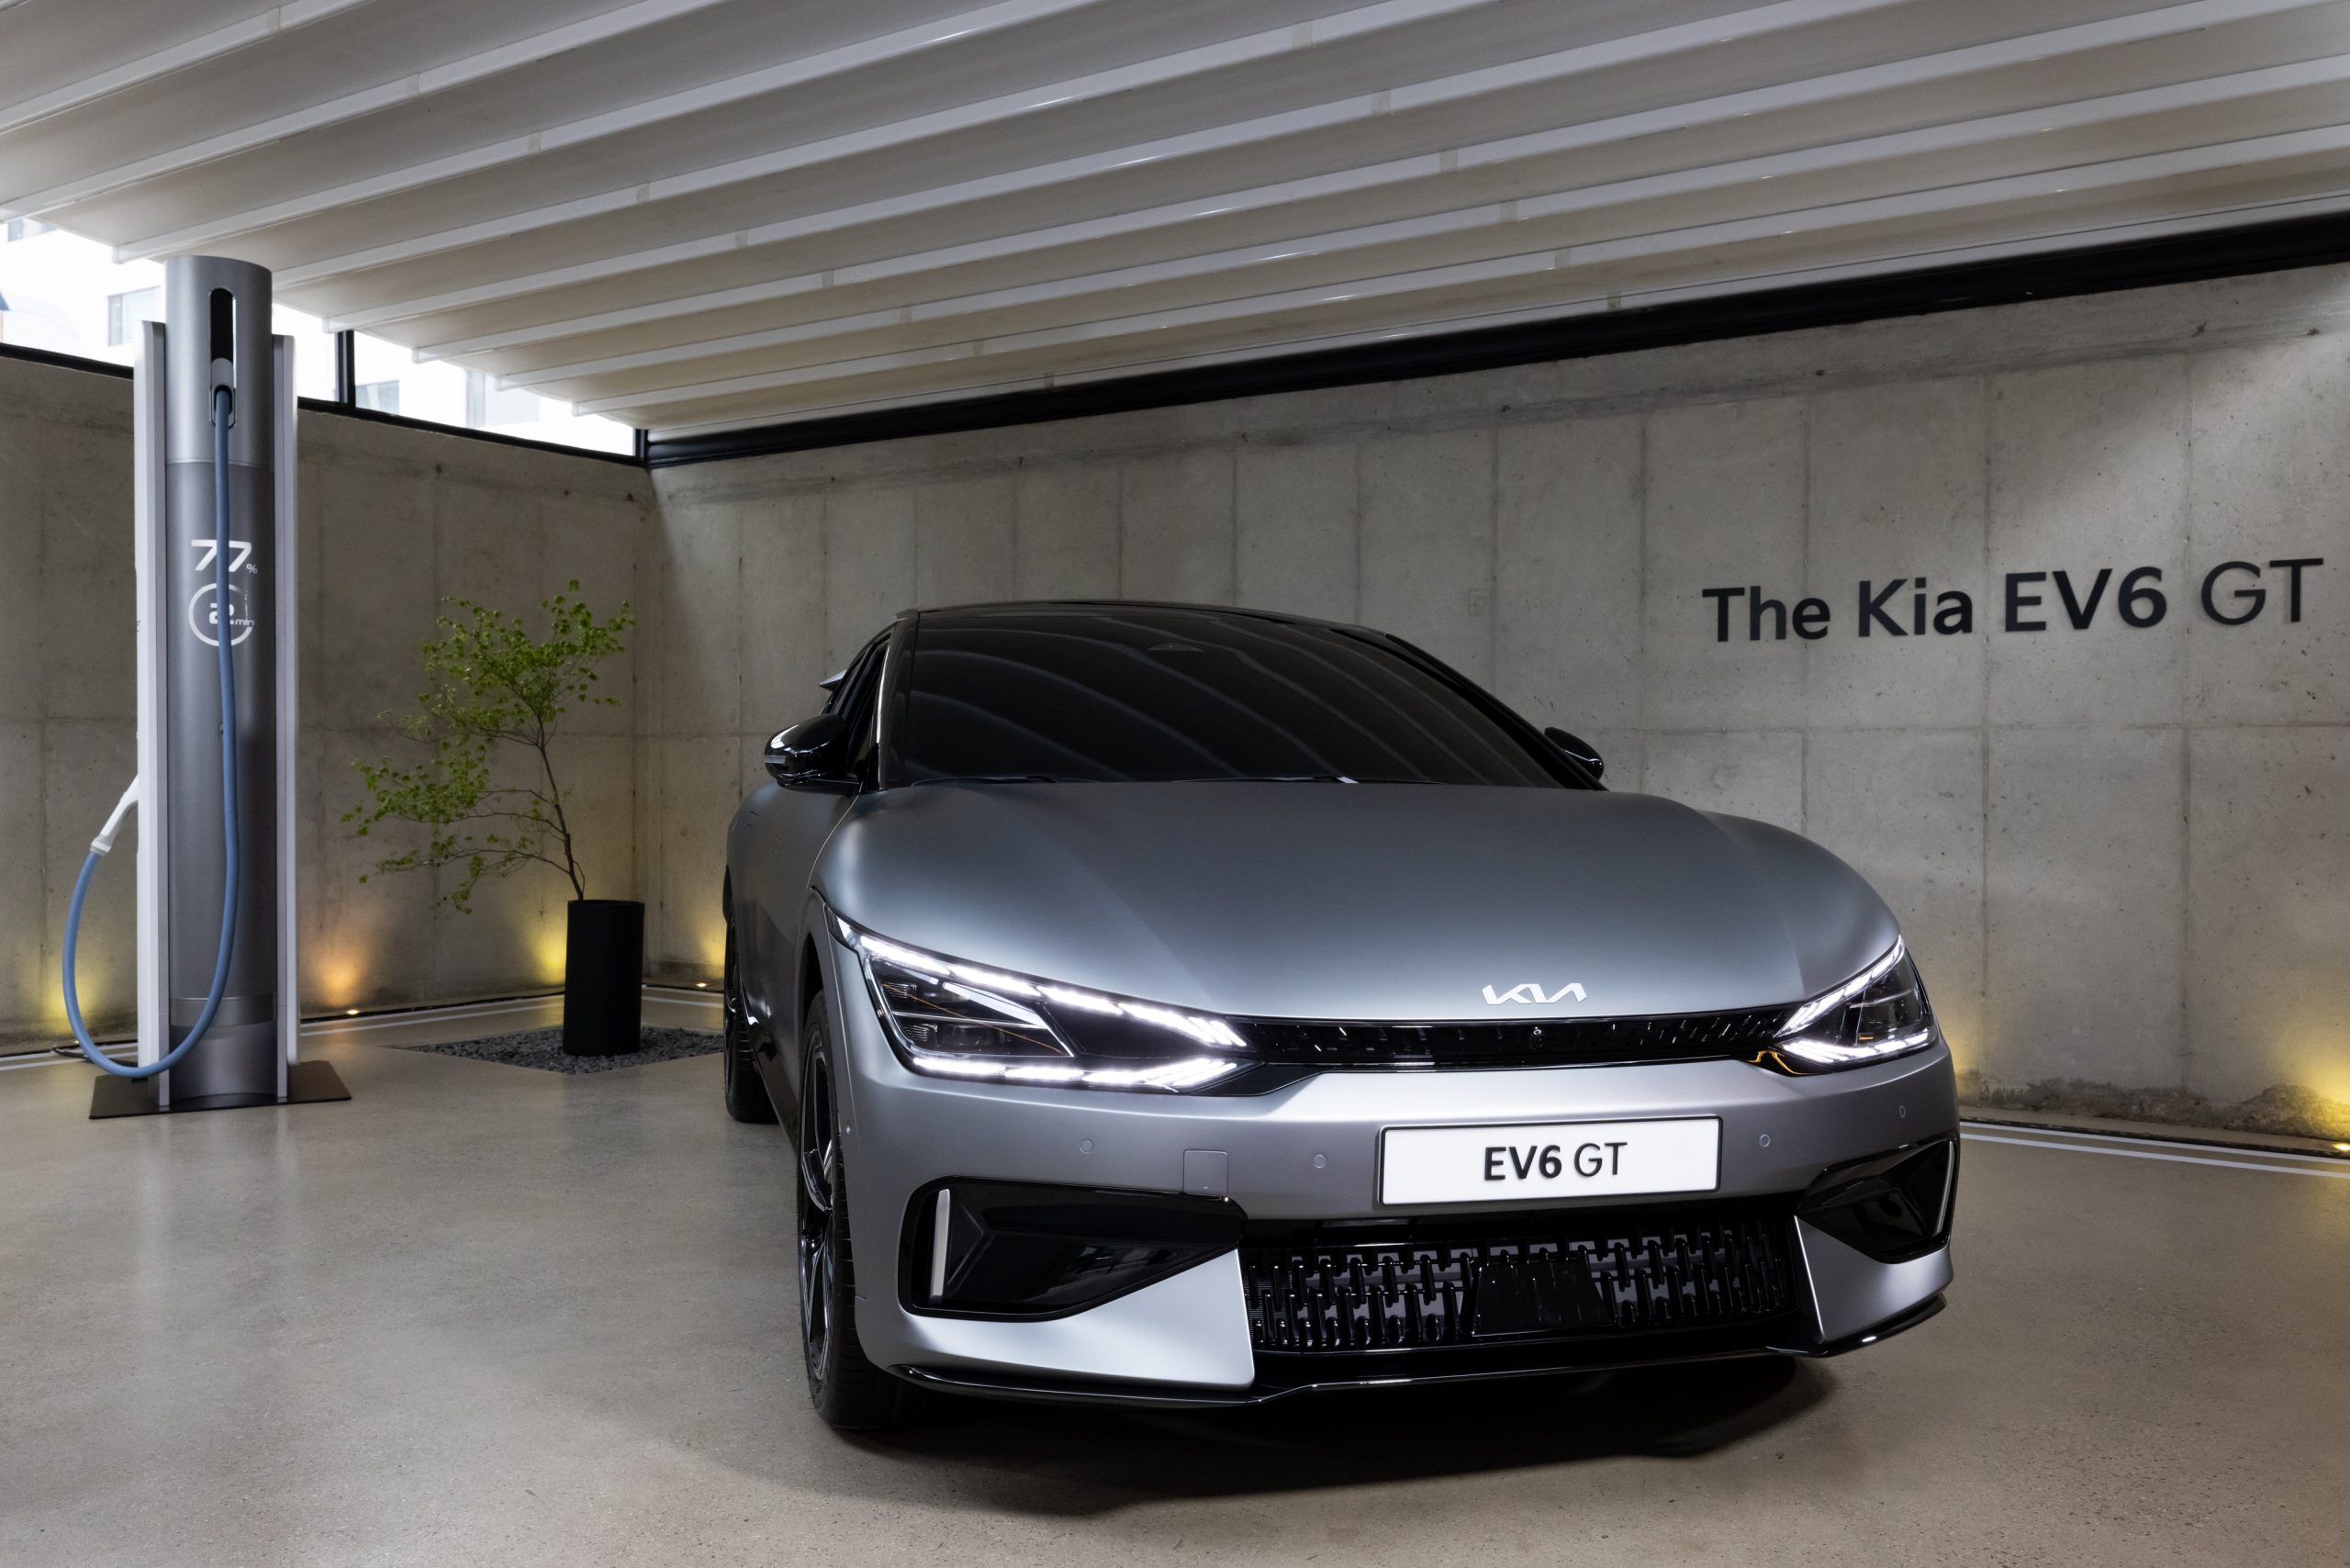 Kia's EV6 next to a charger in a garage